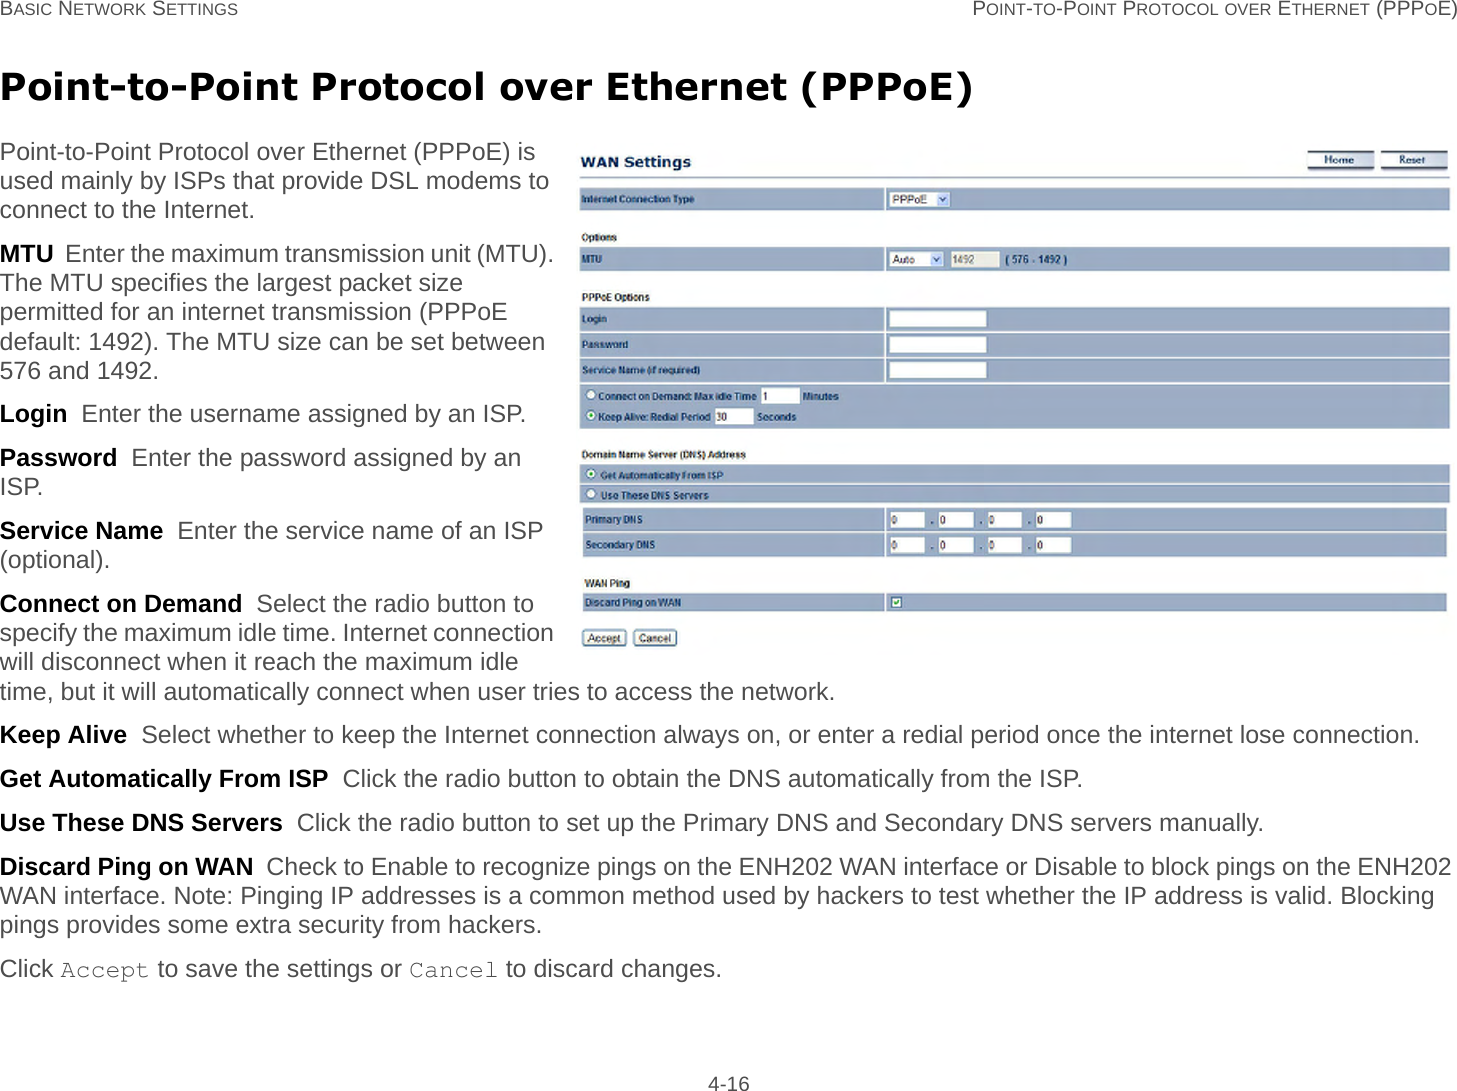 BASIC NETWORK SETTINGS POINT-TO-POINT PROTOCOL OVER ETHERNET (PPPOE) 4-16Point-to-Point Protocol over Ethernet (PPPoE)Point-to-Point Protocol over Ethernet (PPPoE) is used mainly by ISPs that provide DSL modems to connect to the Internet.MTU  Enter the maximum transmission unit (MTU). The MTU specifies the largest packet size permitted for an internet transmission (PPPoE default: 1492). The MTU size can be set between 576 and 1492.Login  Enter the username assigned by an ISP.Password  Enter the password assigned by an ISP.Service Name  Enter the service name of an ISP (optional).Connect on Demand  Select the radio button to specify the maximum idle time. Internet connection will disconnect when it reach the maximum idle time, but it will automatically connect when user tries to access the network.Keep Alive  Select whether to keep the Internet connection always on, or enter a redial period once the internet lose connection.Get Automatically From ISP  Click the radio button to obtain the DNS automatically from the ISP.Use These DNS Servers  Click the radio button to set up the Primary DNS and Secondary DNS servers manually.Discard Ping on WAN  Check to Enable to recognize pings on the ENH202 WAN interface or Disable to block pings on the ENH202 WAN interface. Note: Pinging IP addresses is a common method used by hackers to test whether the IP address is valid. Blocking pings provides some extra security from hackers.Click Accept to save the settings or Cancel to discard changes.